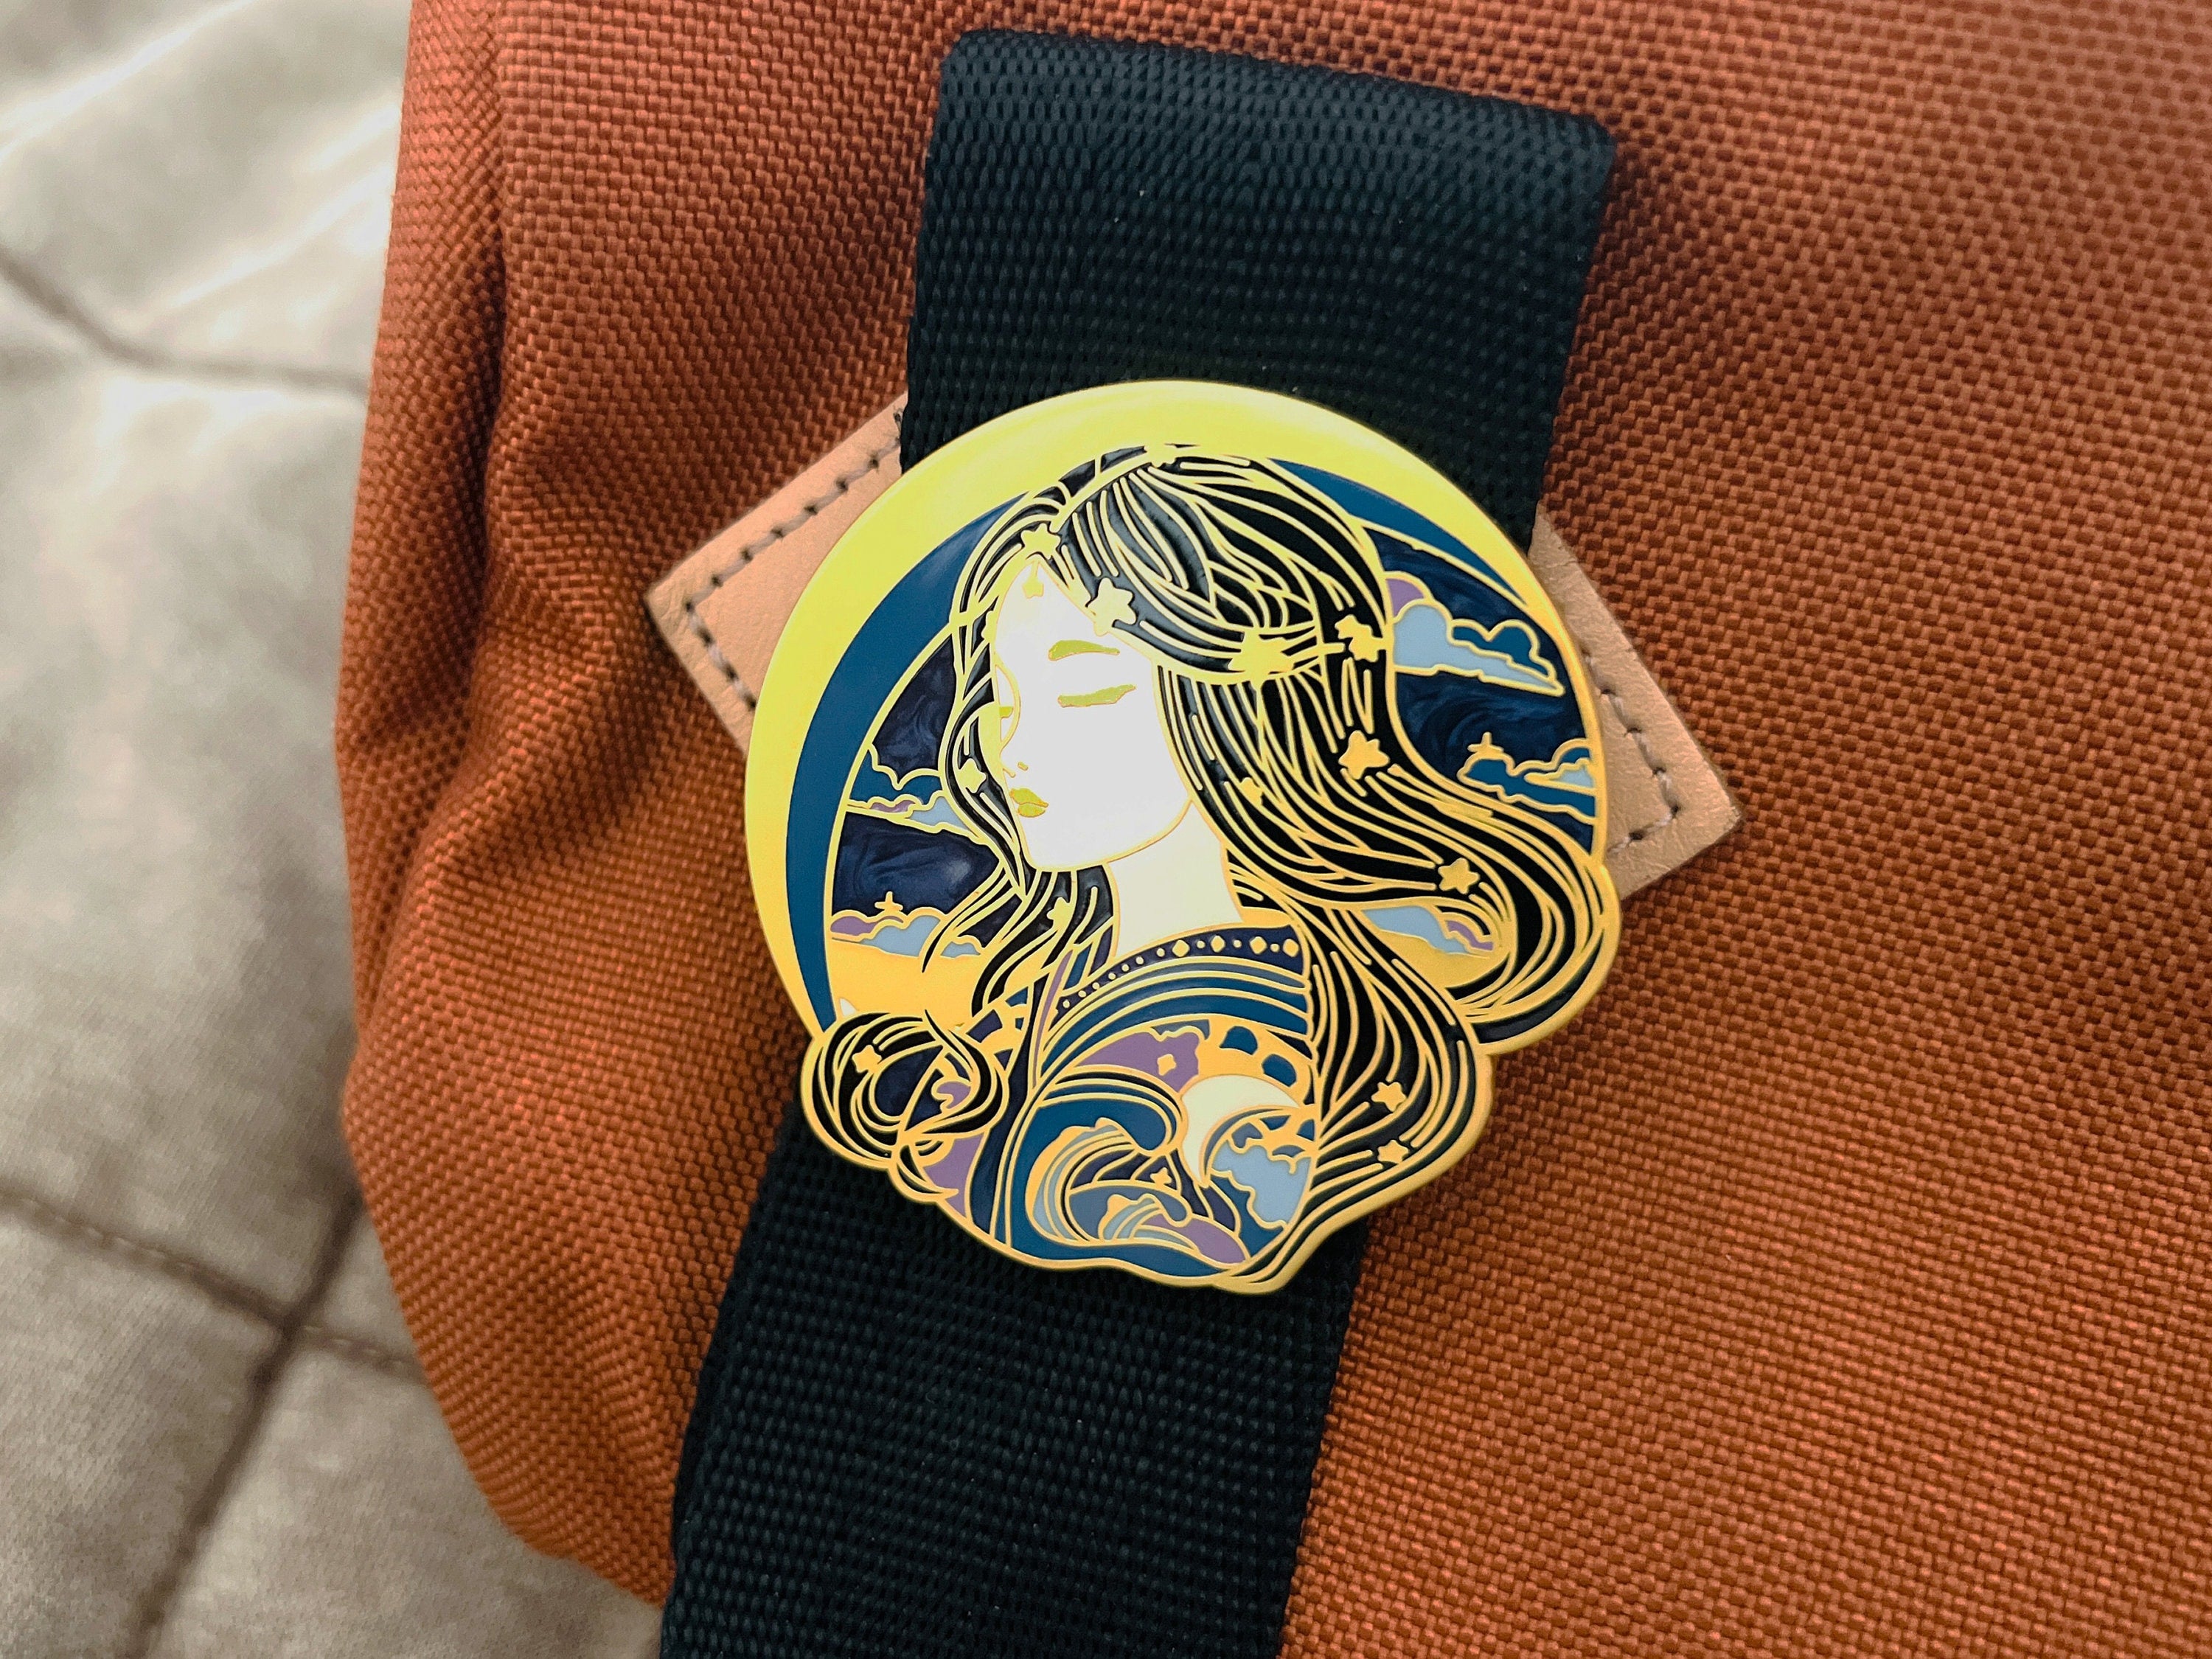 Star Empress Enamel Pin - Ethereal Princess and Celestial Lapel Pin - Art Nouveau Eastern Style Badge - The Sciencey